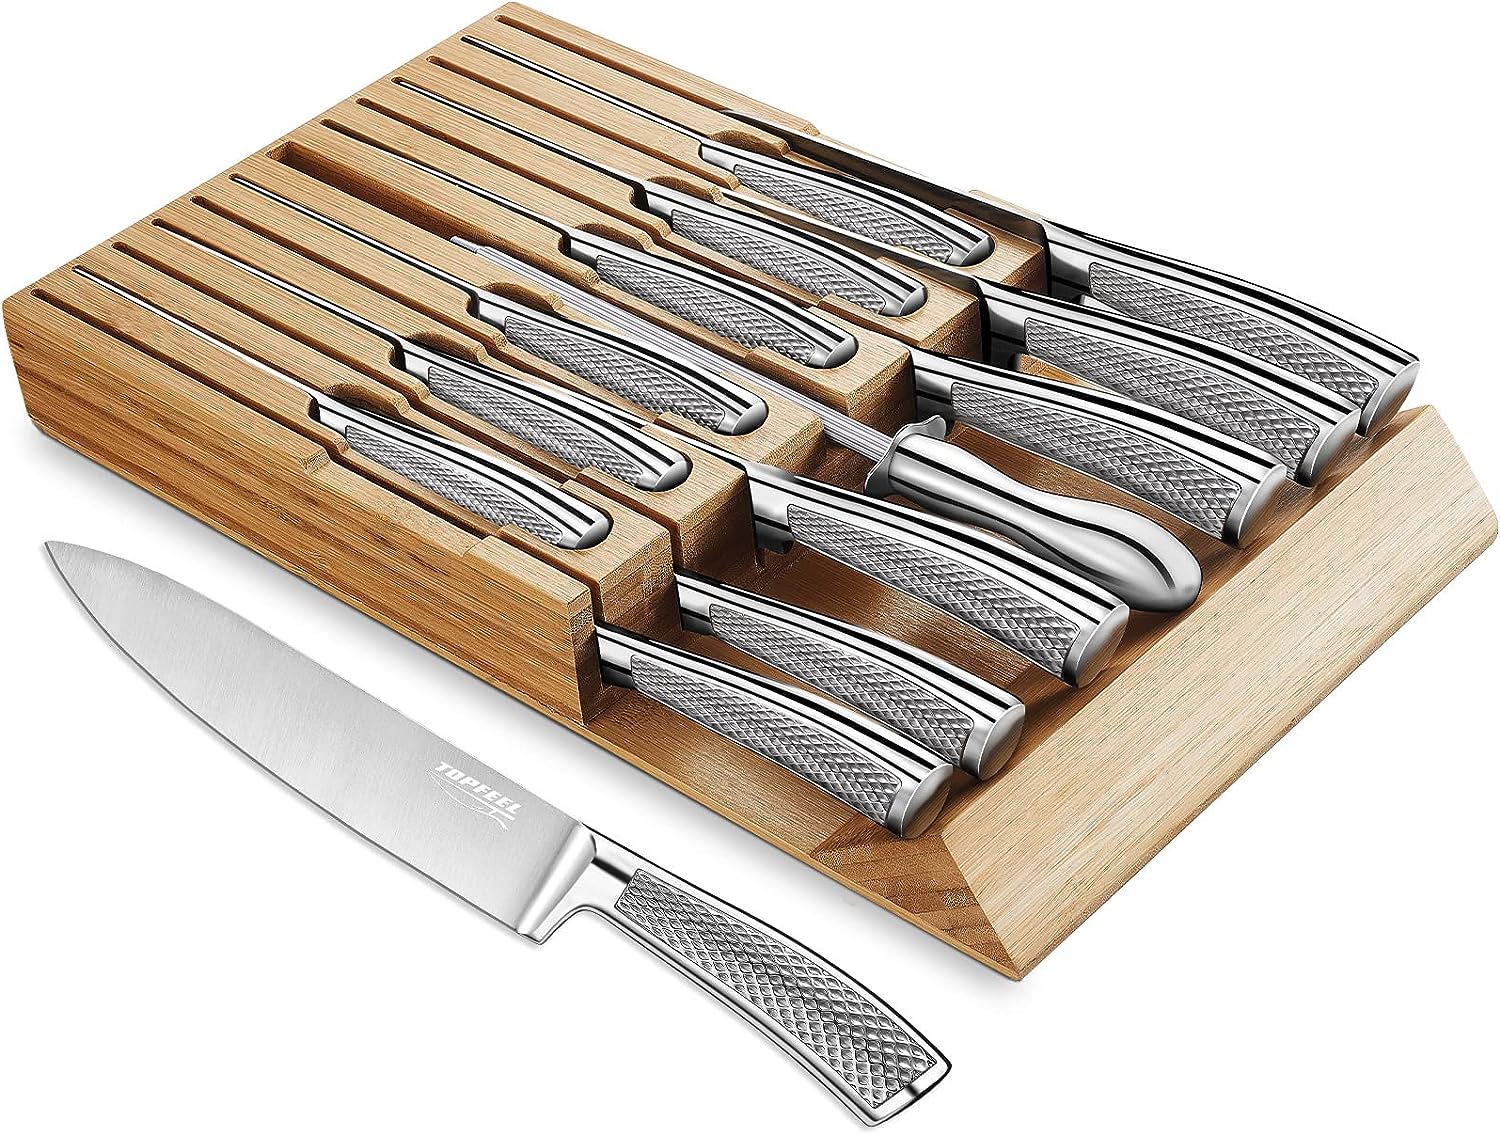 14 Pcs German Stainless Steel Kitchen Knife Set with In-Drawer Bamboo Knife Block - 7 Chef Knives,6 Serrated Steak Knives, Knife Sharpener, Ultra Sharp Chef Knife Set with Full-Tang Design